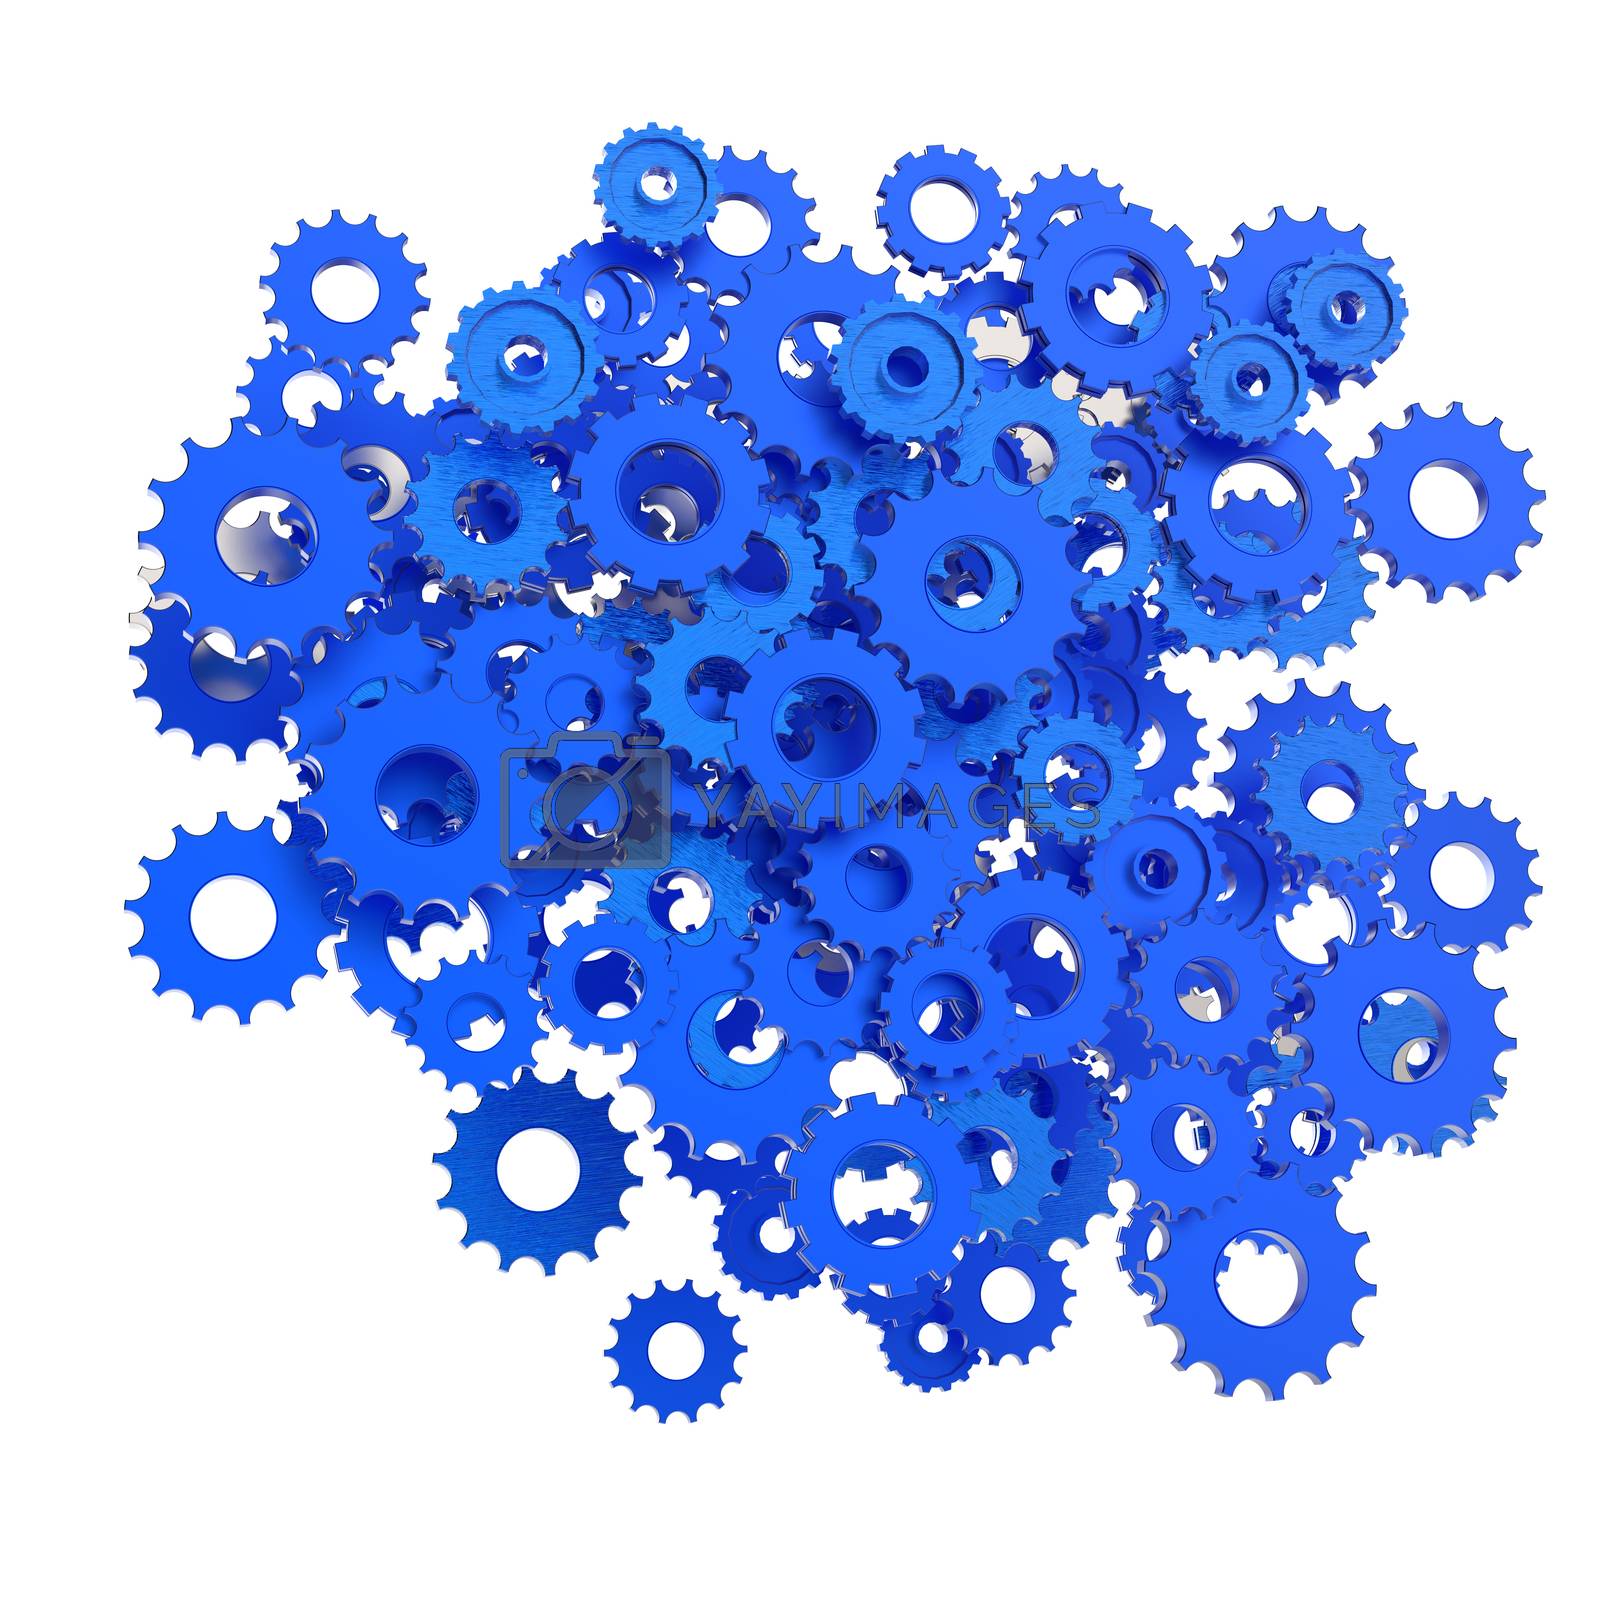 Royalty free image of 3d cog gear on white background  by everythingpossible